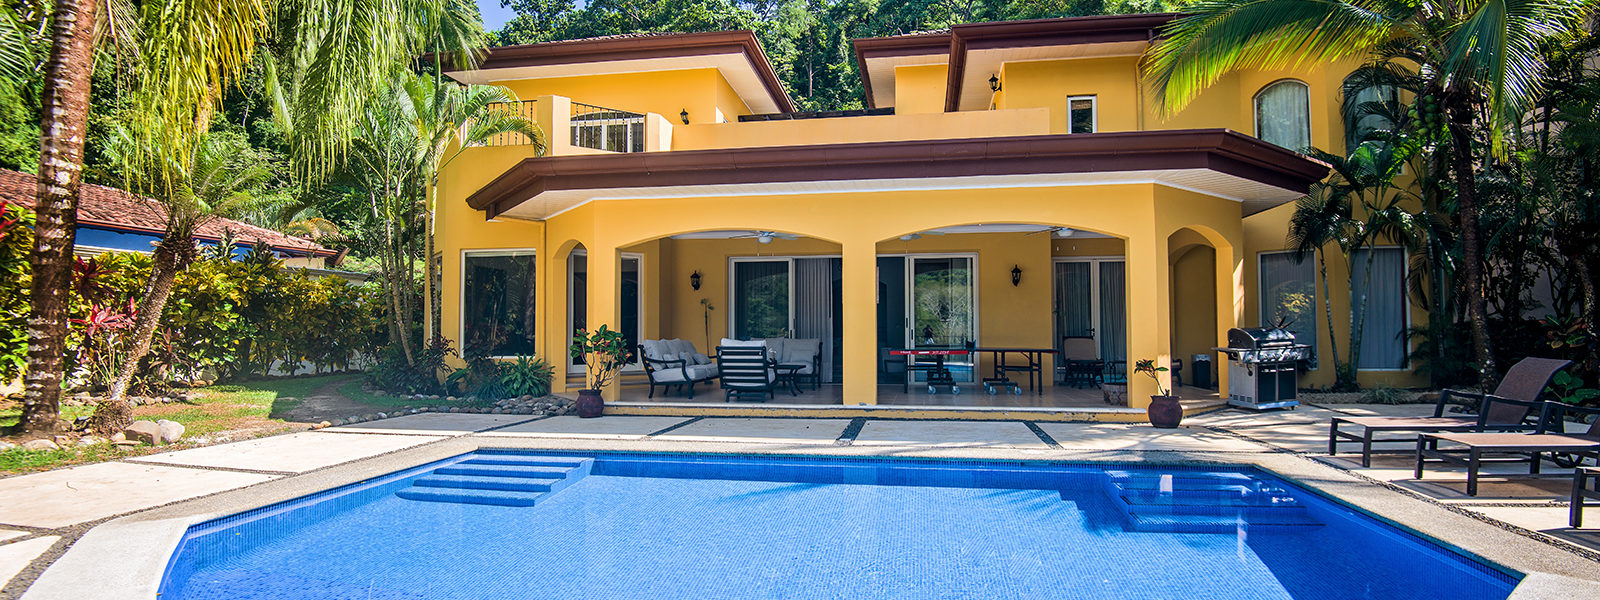 This villa has a private pool oasis, with a sun-soaked lounge and an entertainment haven, paradise awaits!